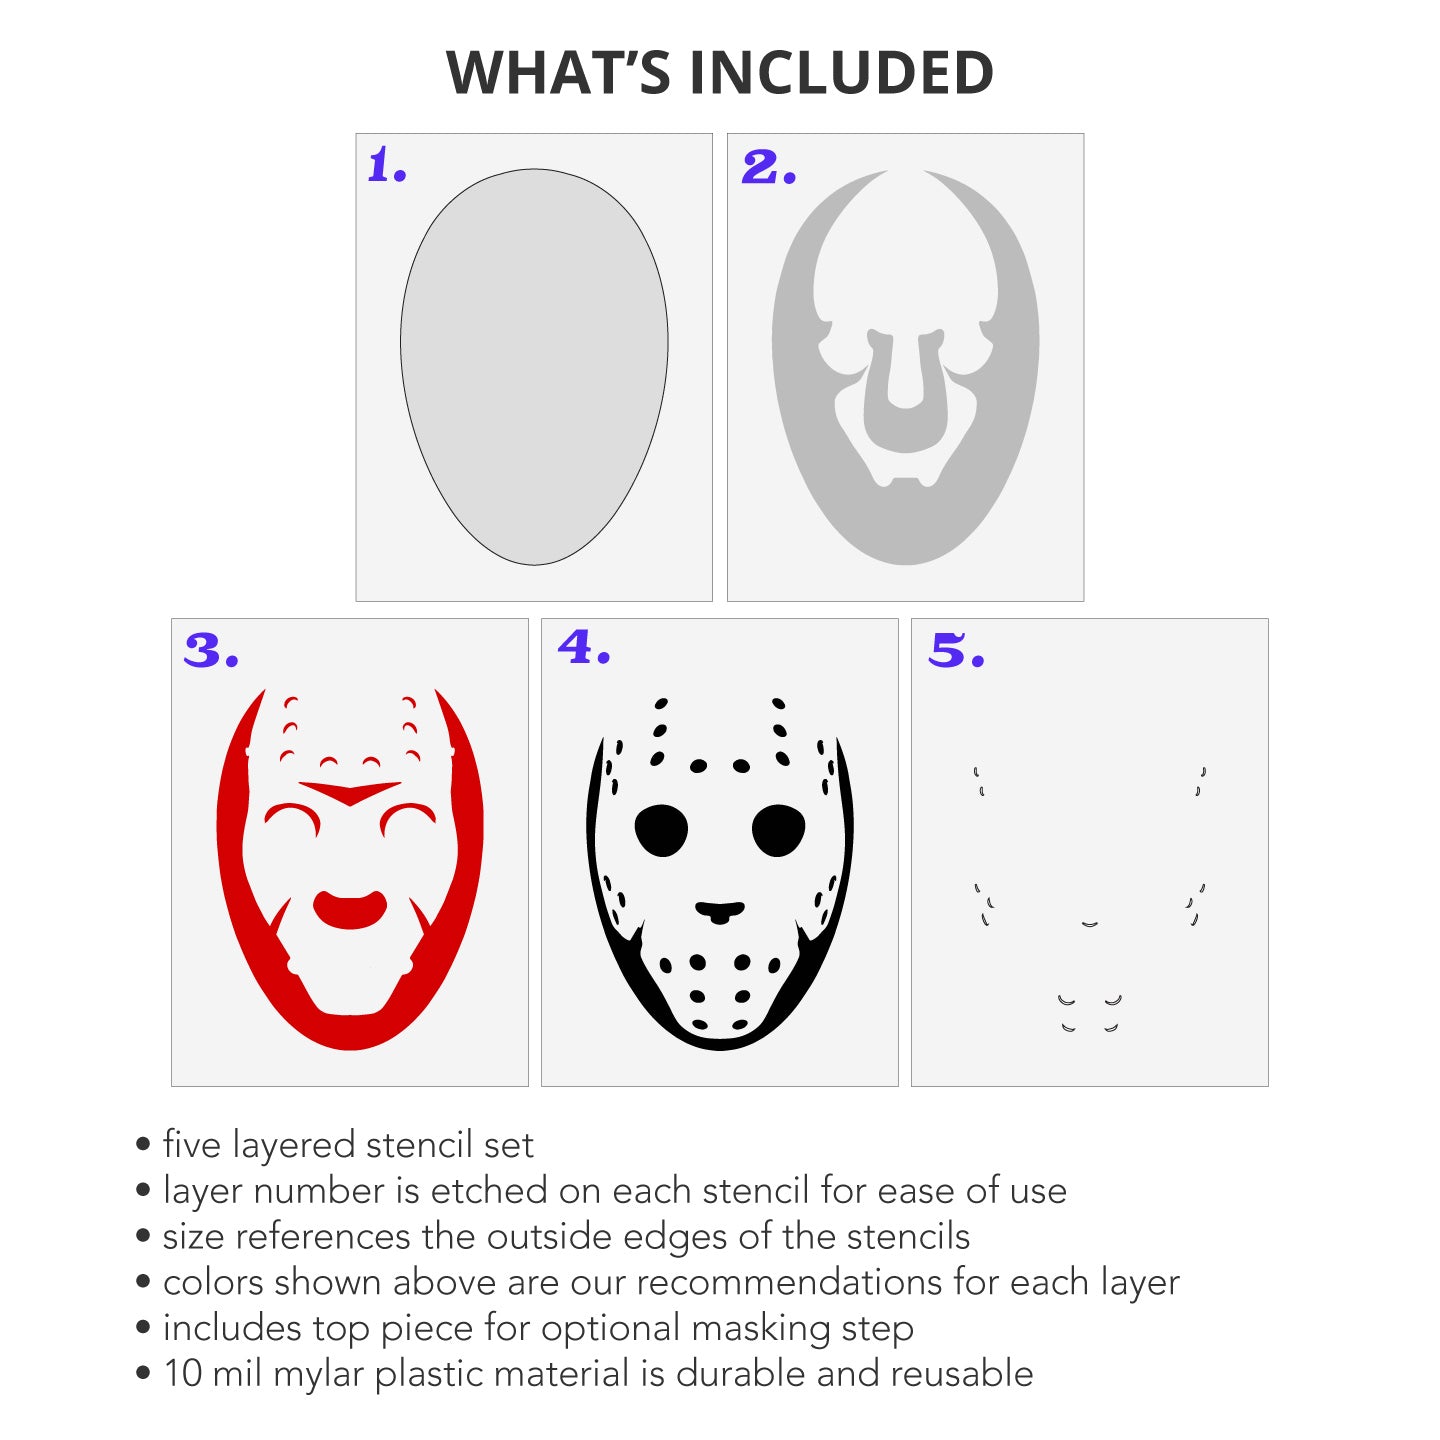 What's Included Jason Mask